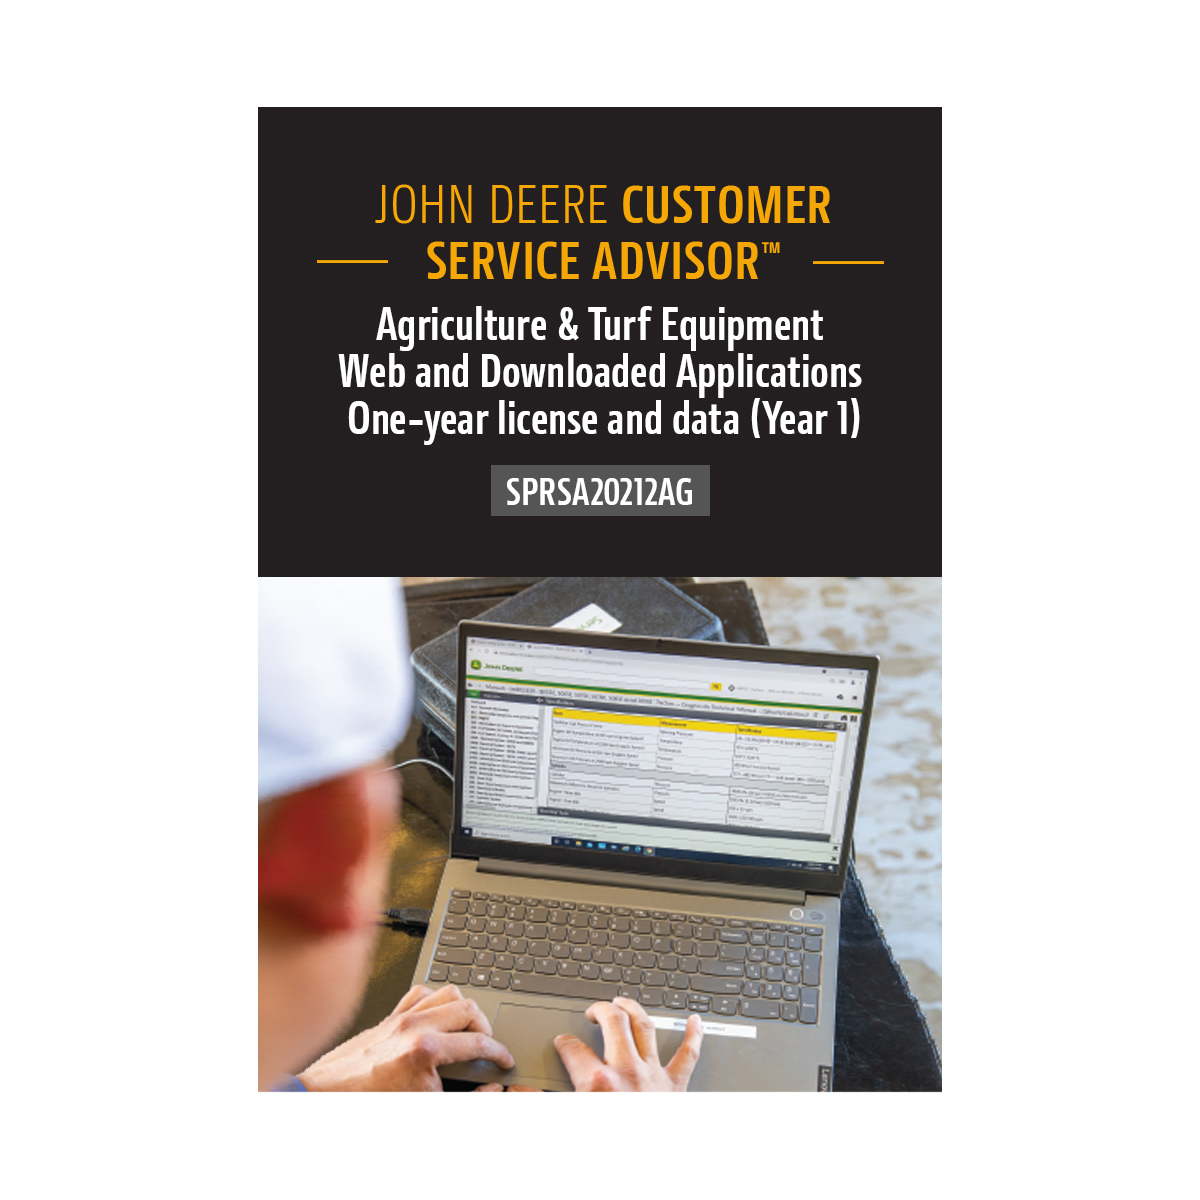 John Deere Customer Service ADVISOR™ Agriculture & Turf Equipment Web and Downloaded Applications One-year license and data (Year 1)